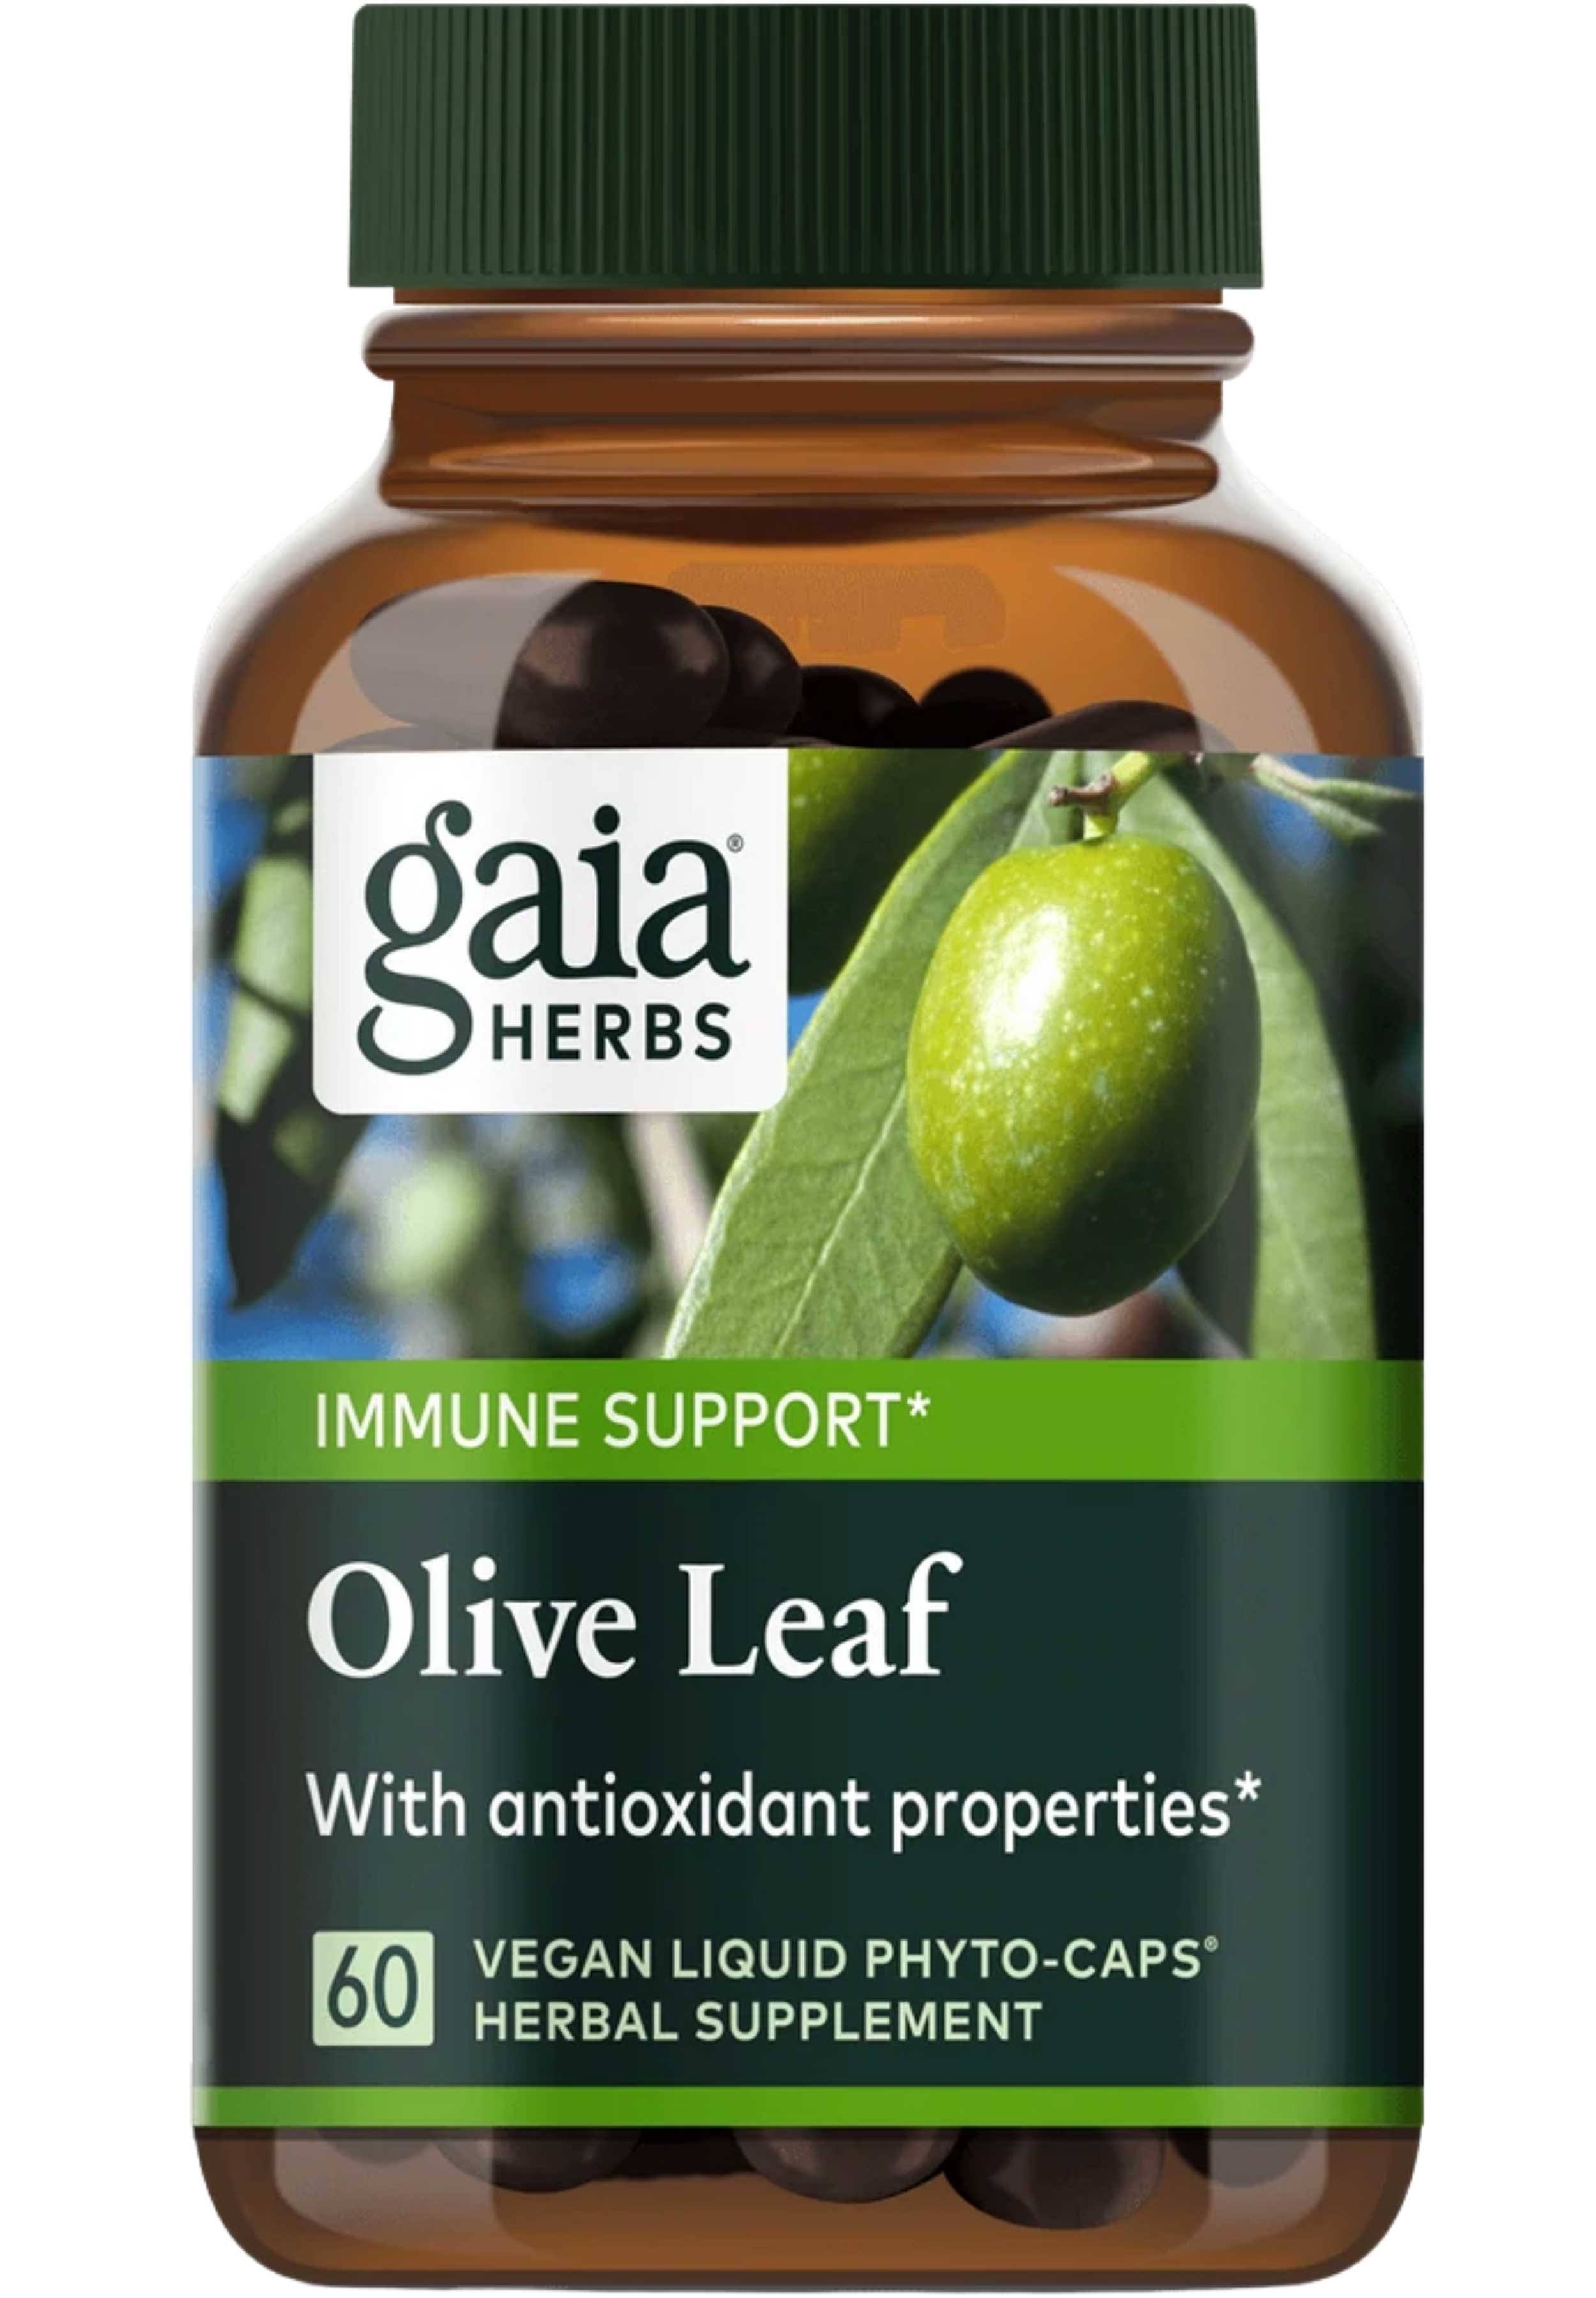 Gaia Herbs Olive Leaf Dietary Supplement - 60 Capsules